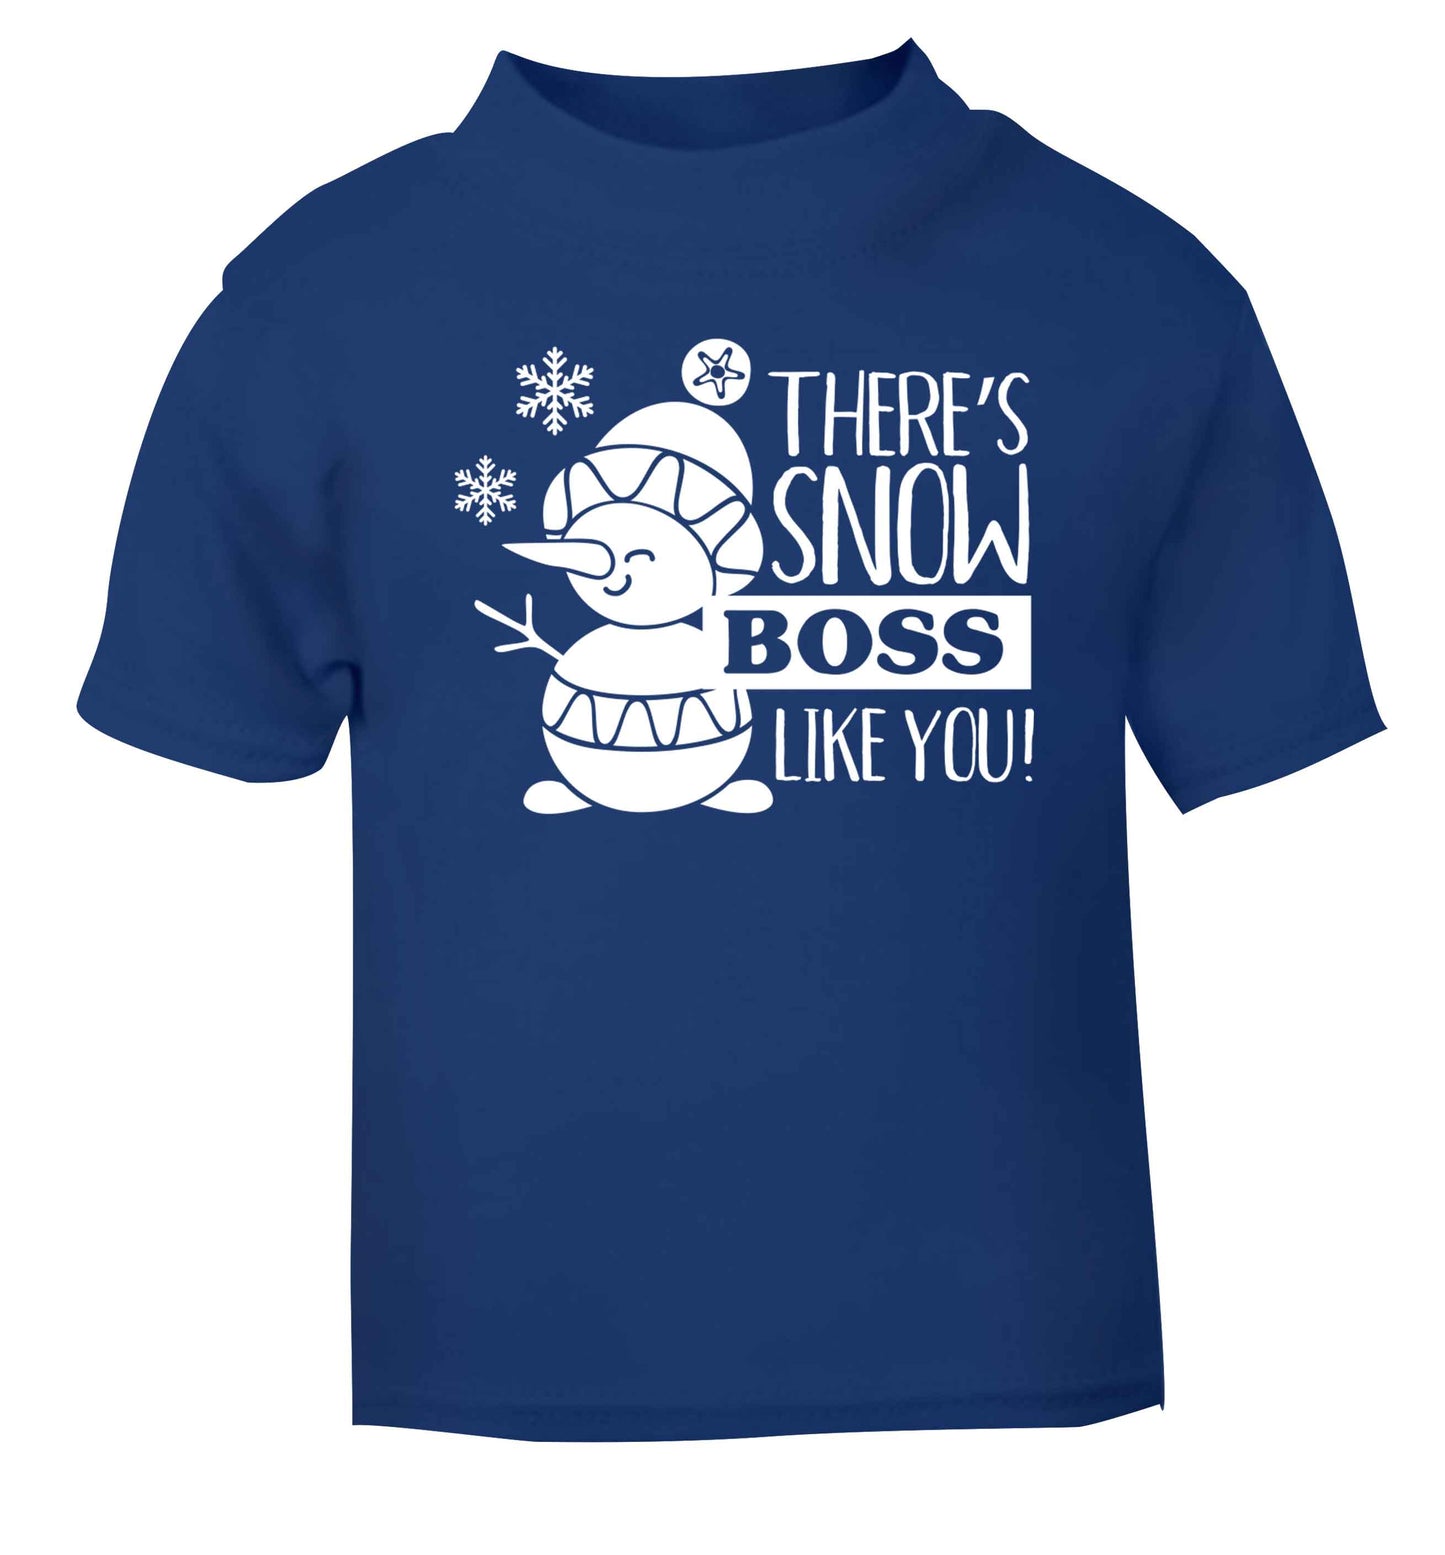 There's snow boss like you blue baby toddler Tshirt 2 Years